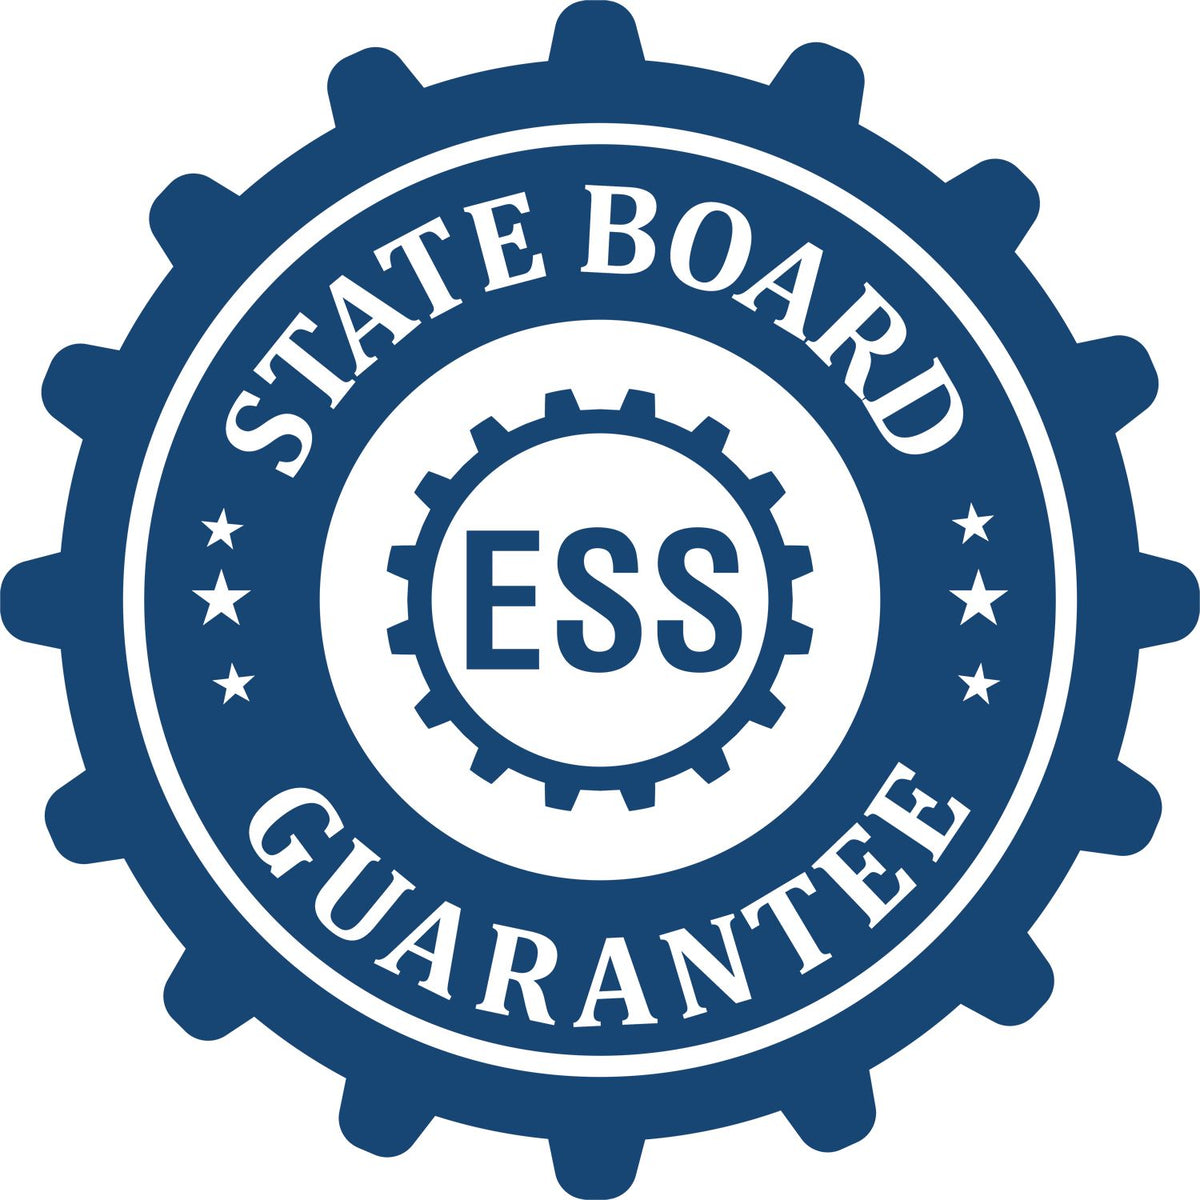 An emblem in a gear shape illustrating a state board guarantee for the Hybrid California Engineer Seal